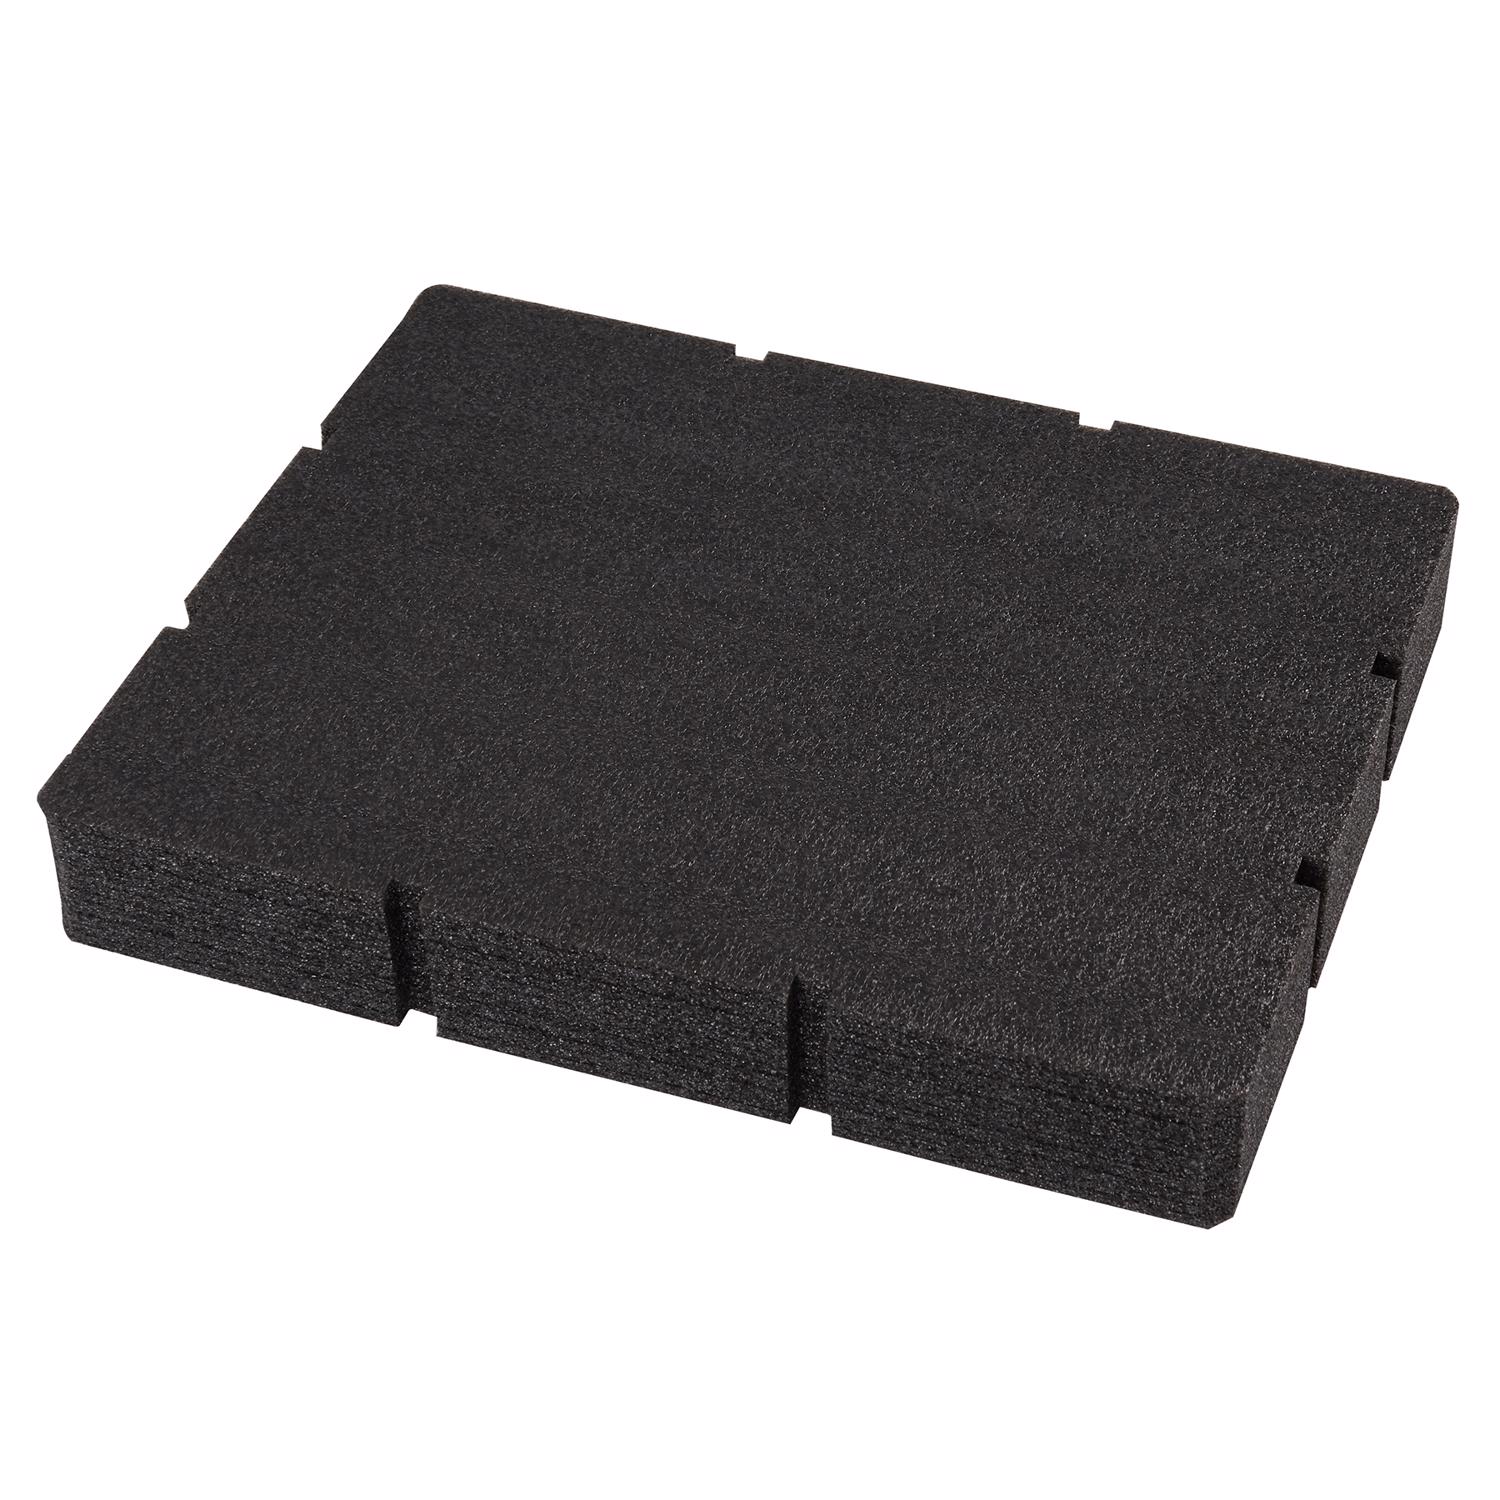 Photos - Tool Box Milwaukee PACKOUT Drawer Dividers Foam Black 48-22-8452 